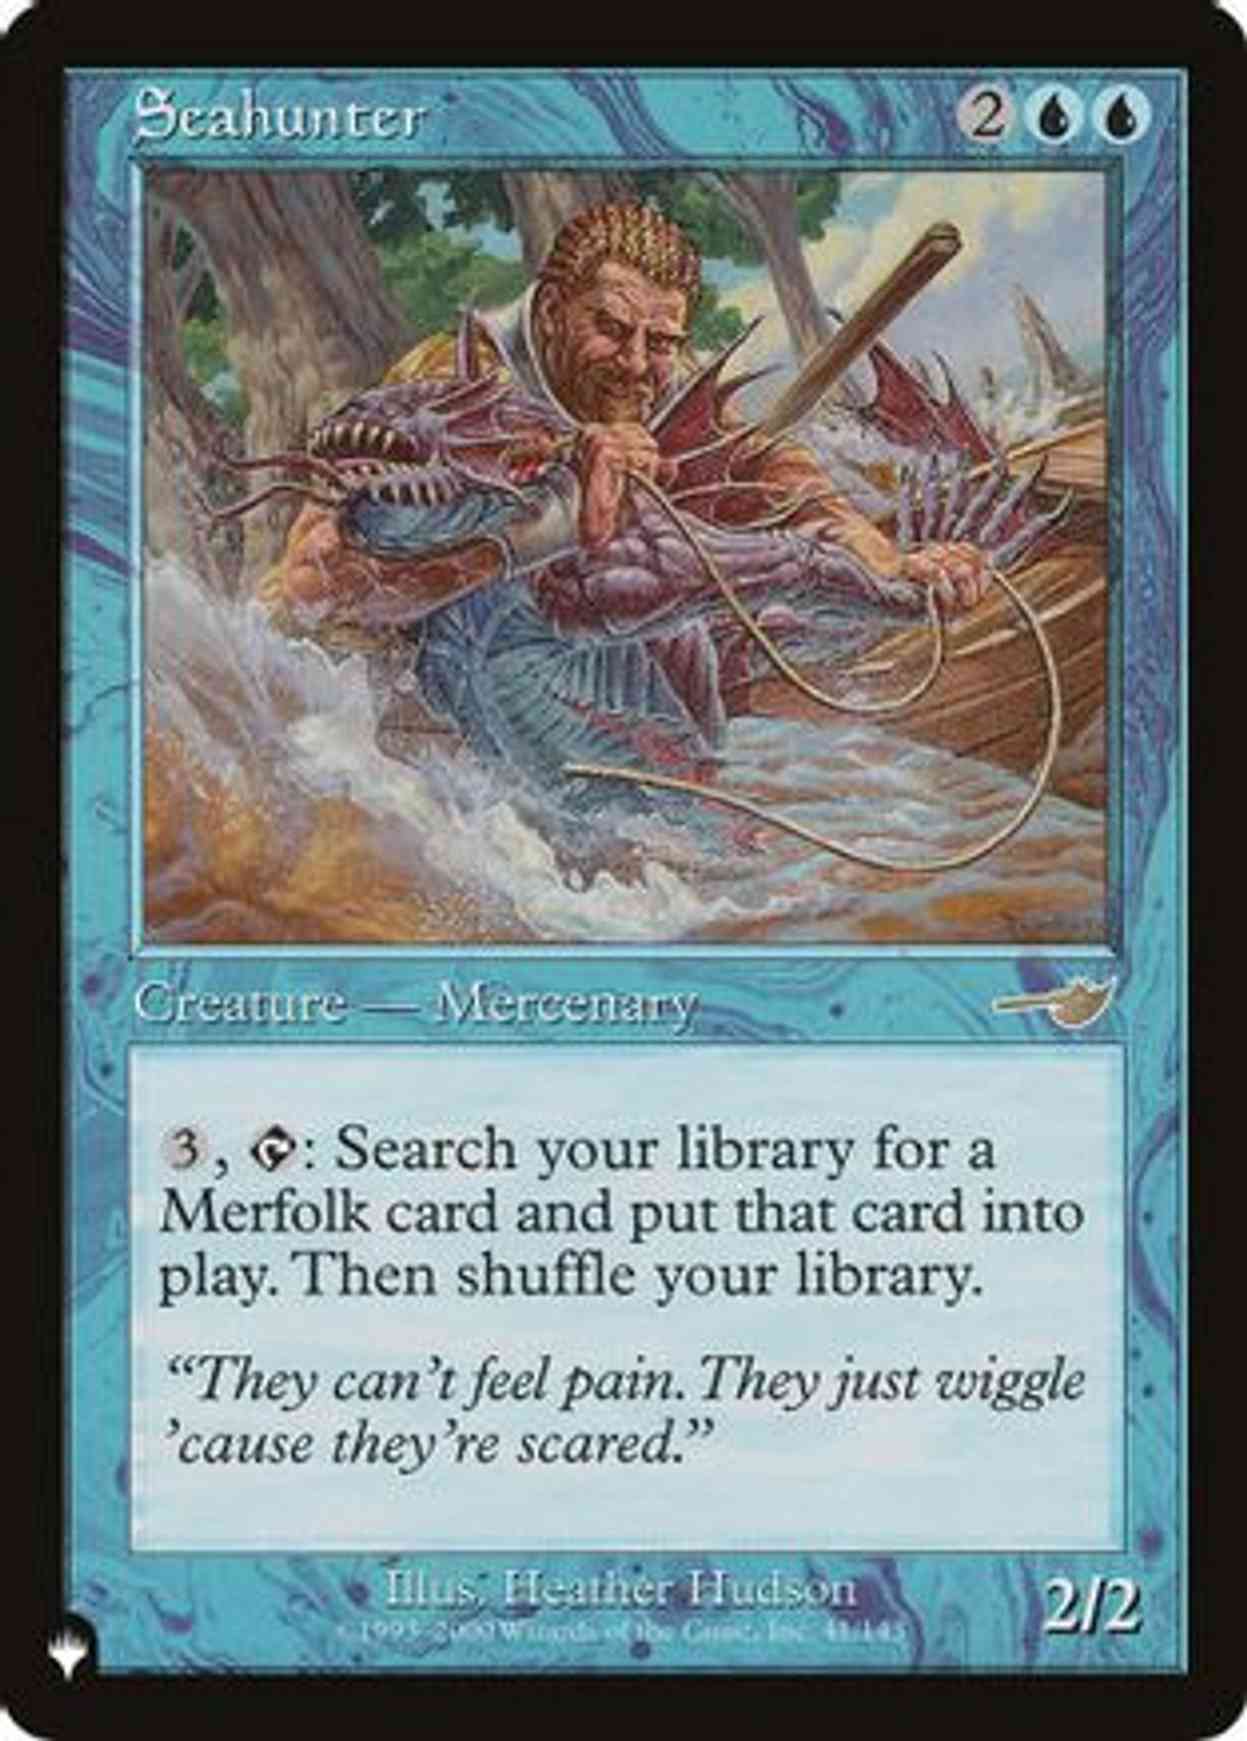 Seahunter magic card front